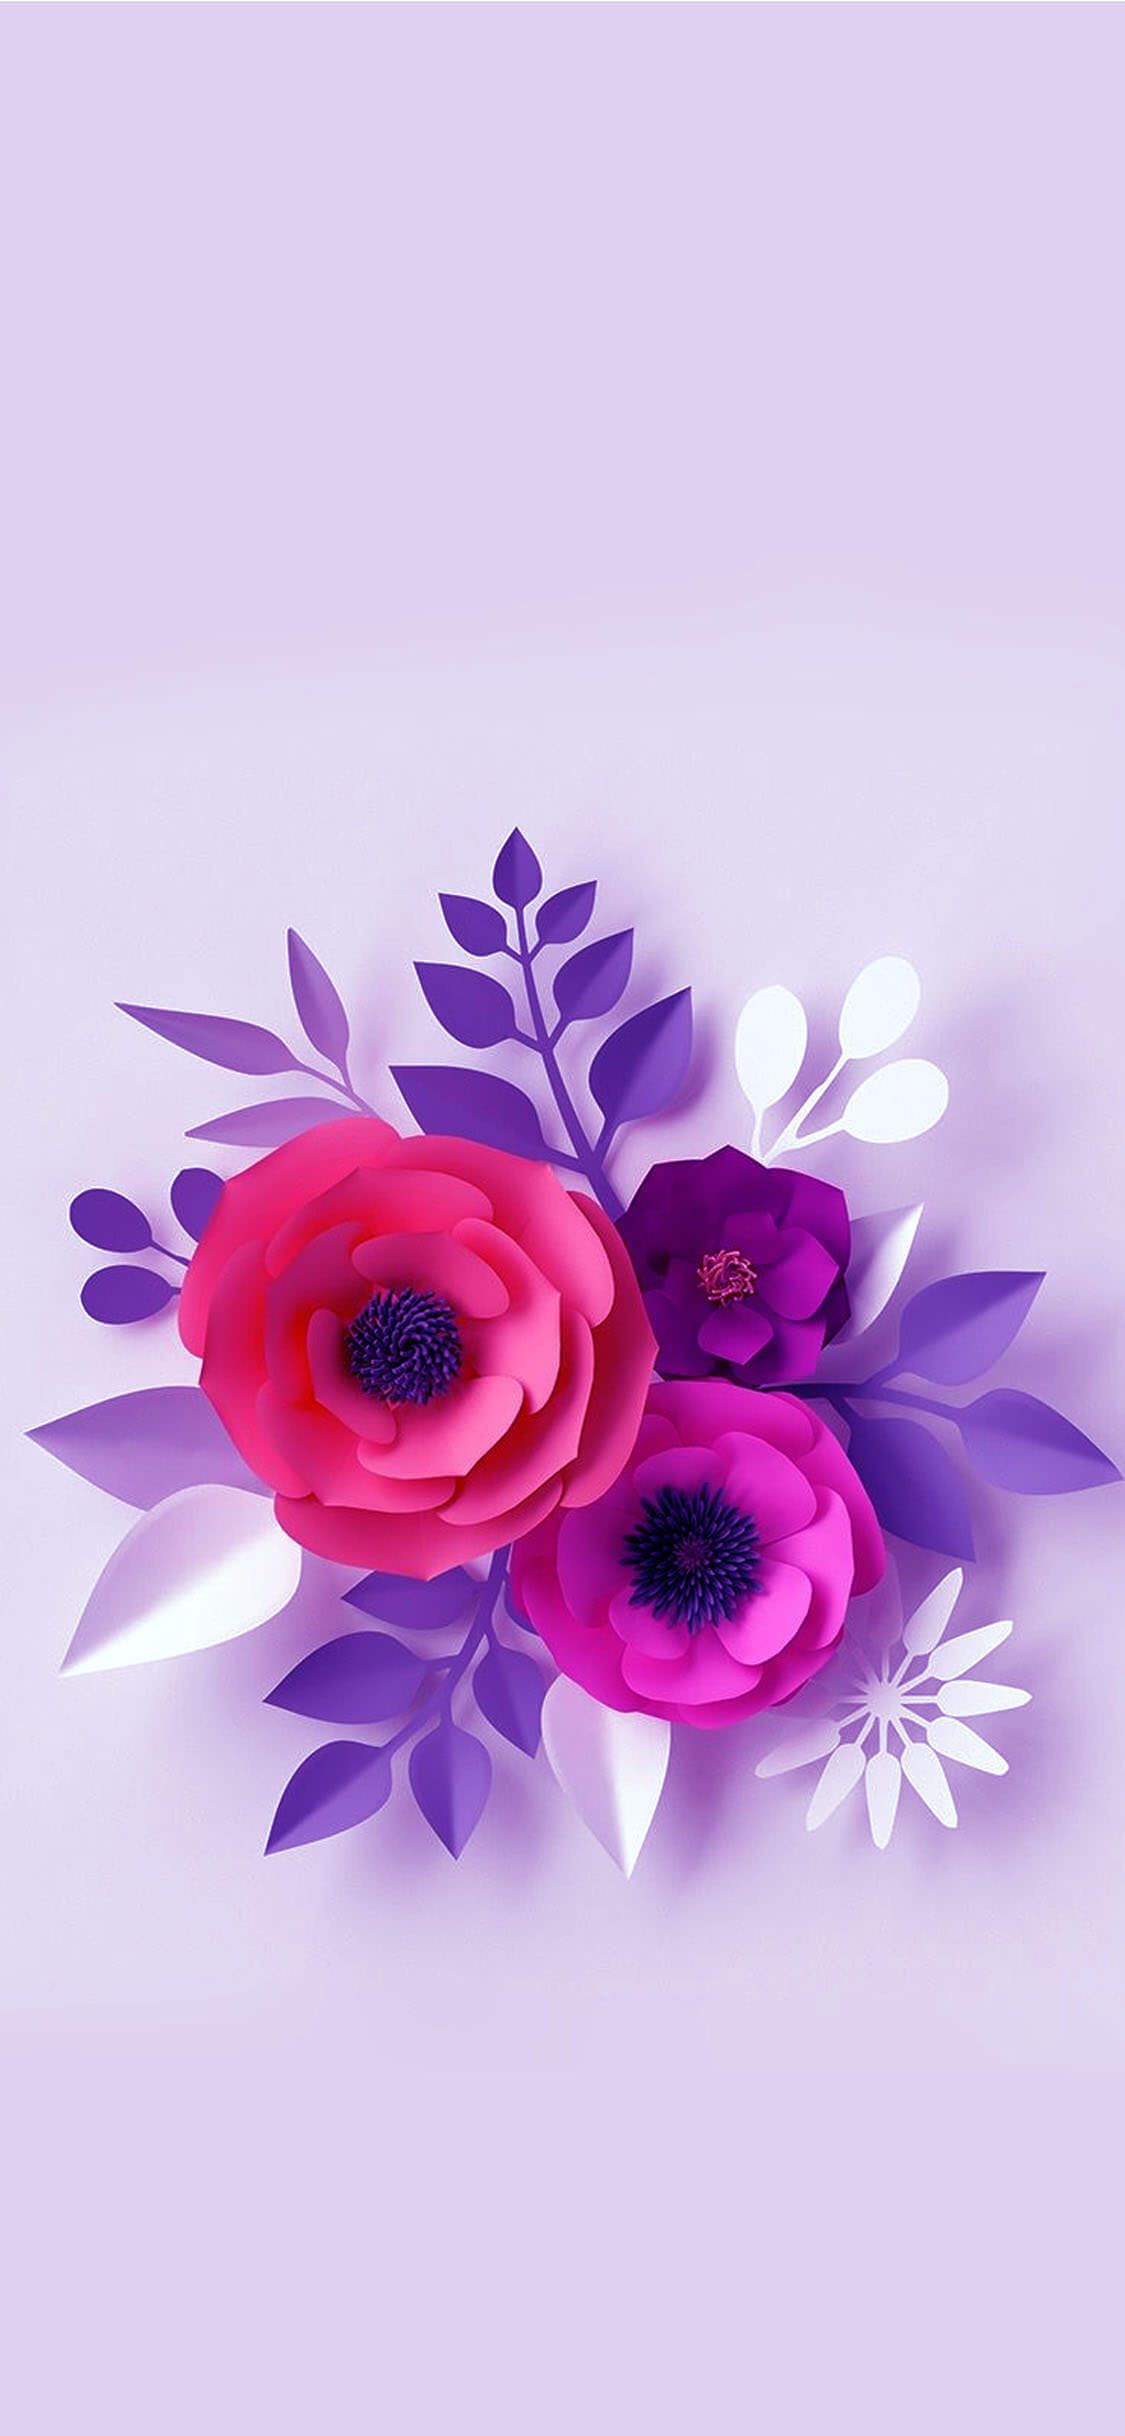 Amazing Floral iPhone Wallpaper Free Amazing Floral iPhone Background